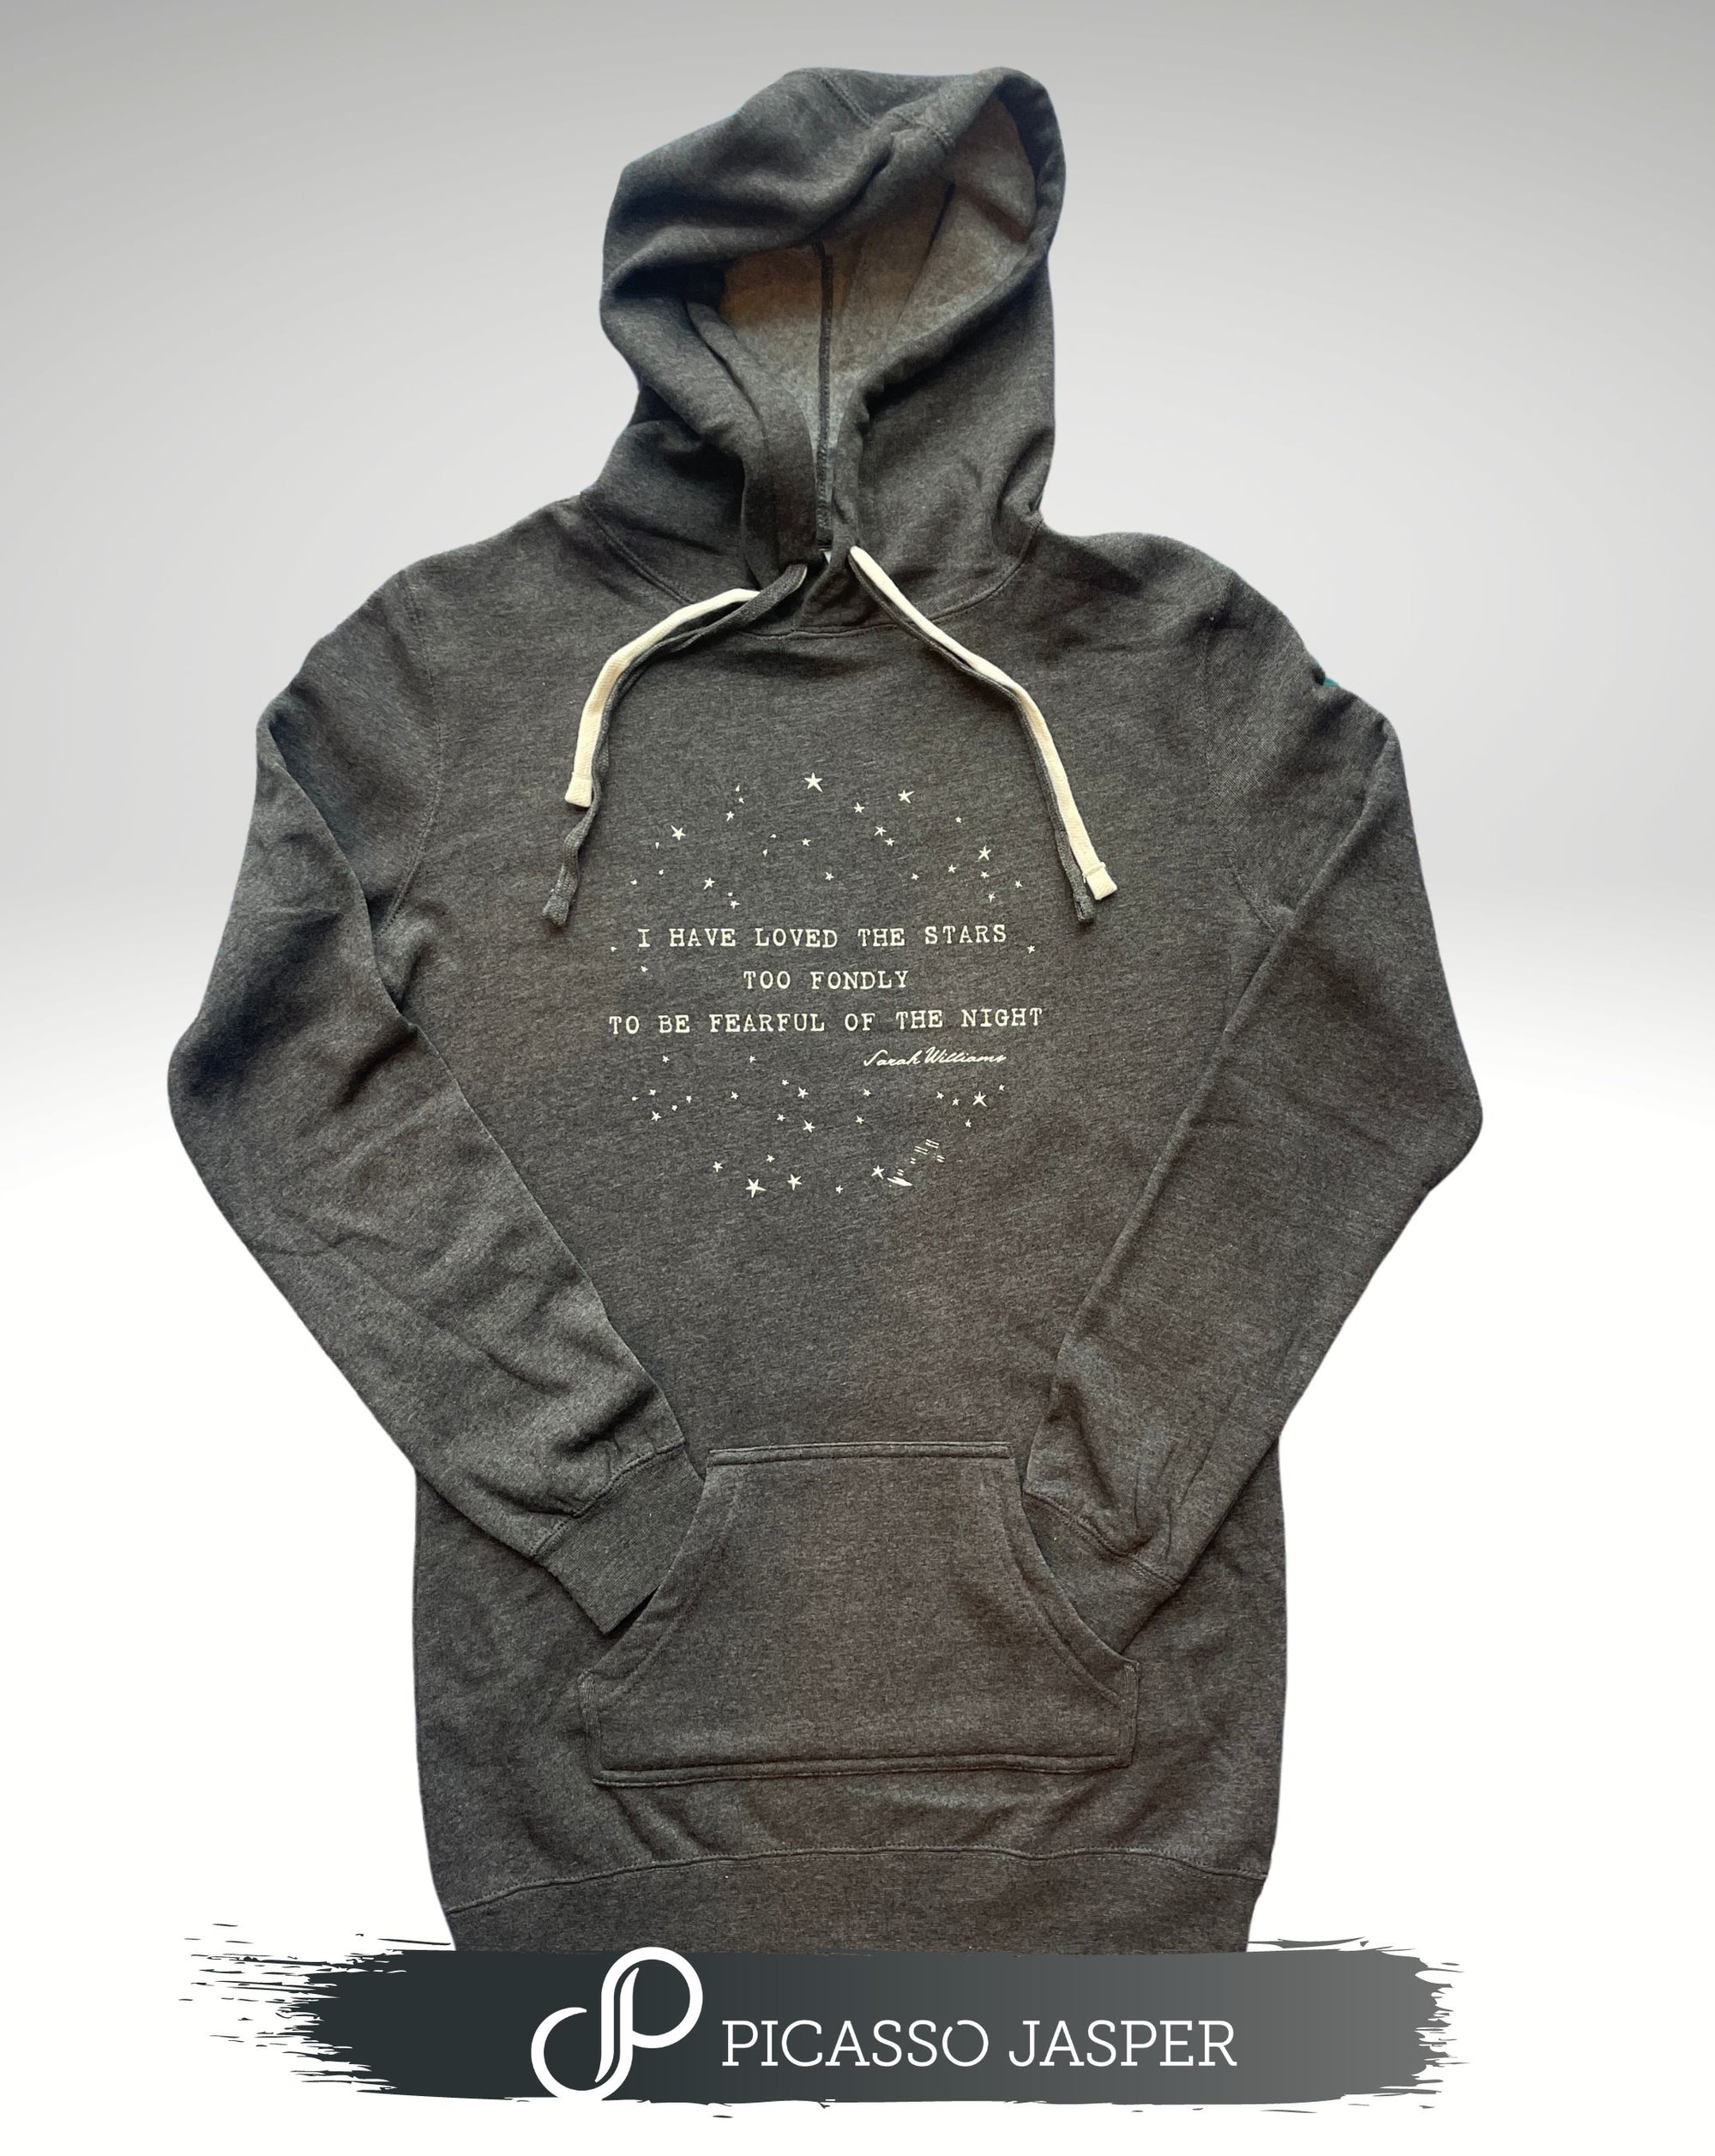 I Have Loved the Stars to Fondly, Sweatshirt Dress - Picasso Jasper